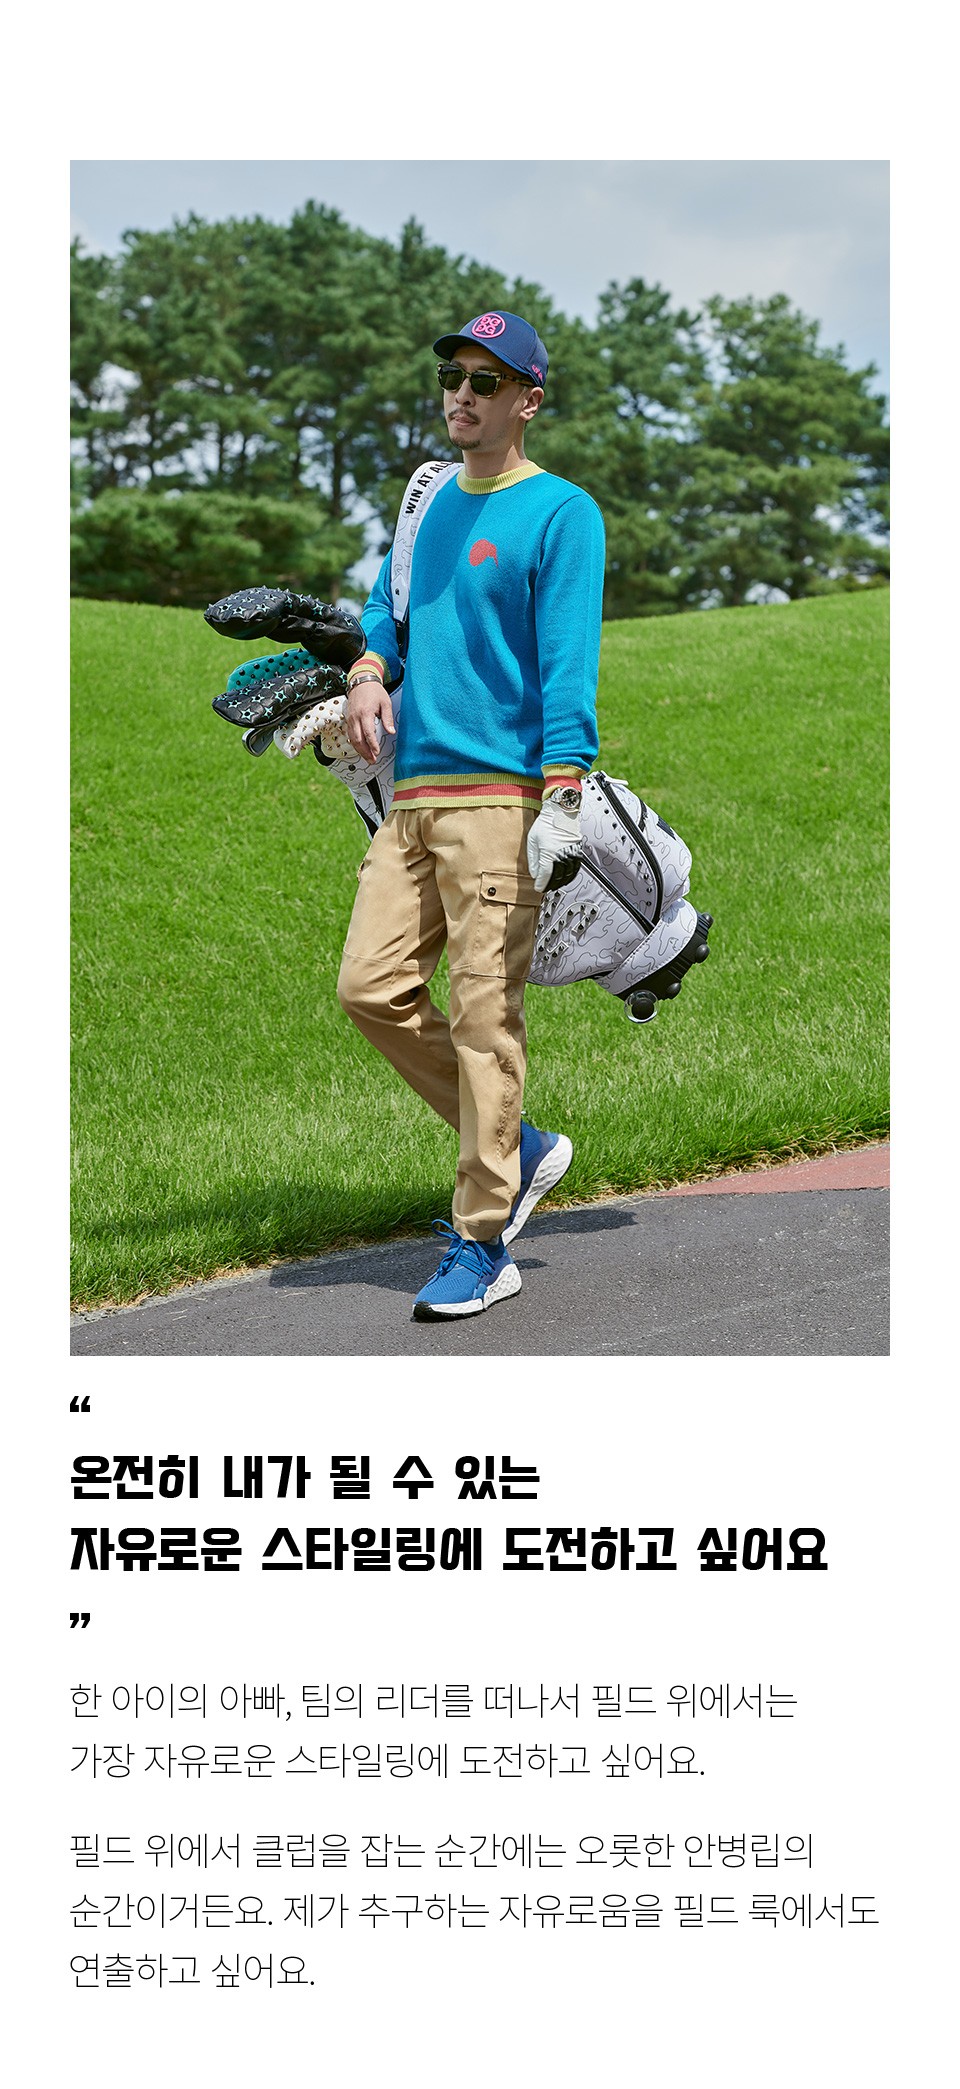 Golf Style Is Cool Now